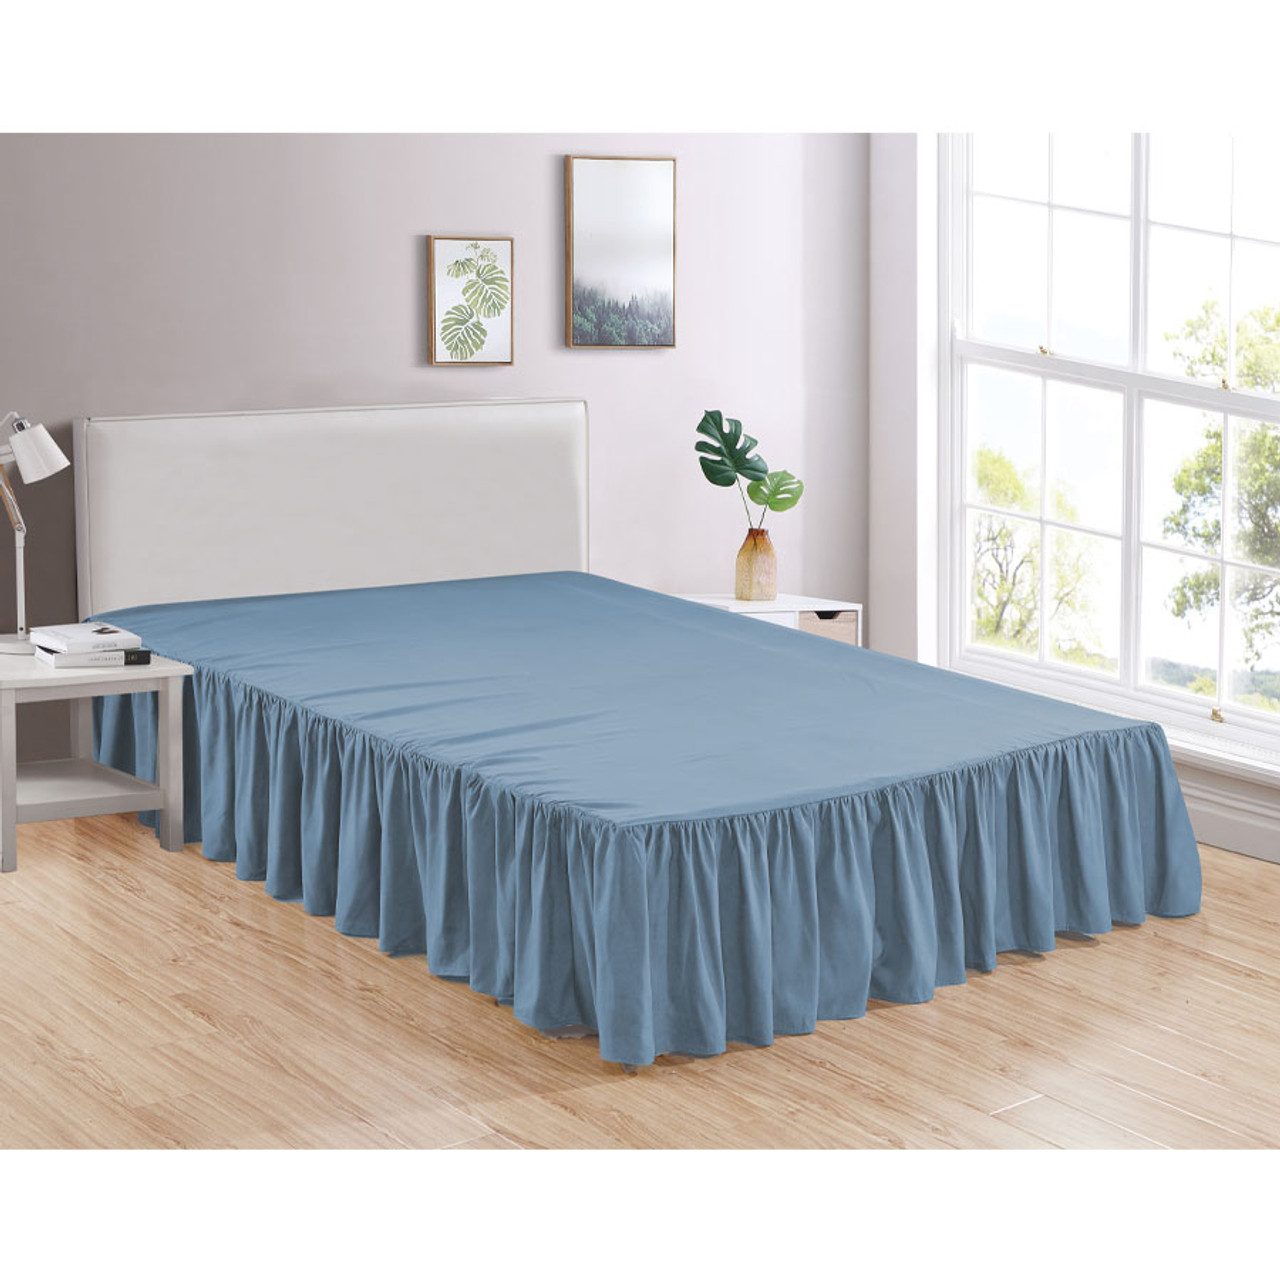 Bed Skirt Soft Dust Ruffle 100% Brushed Microfiber with 14” Drop